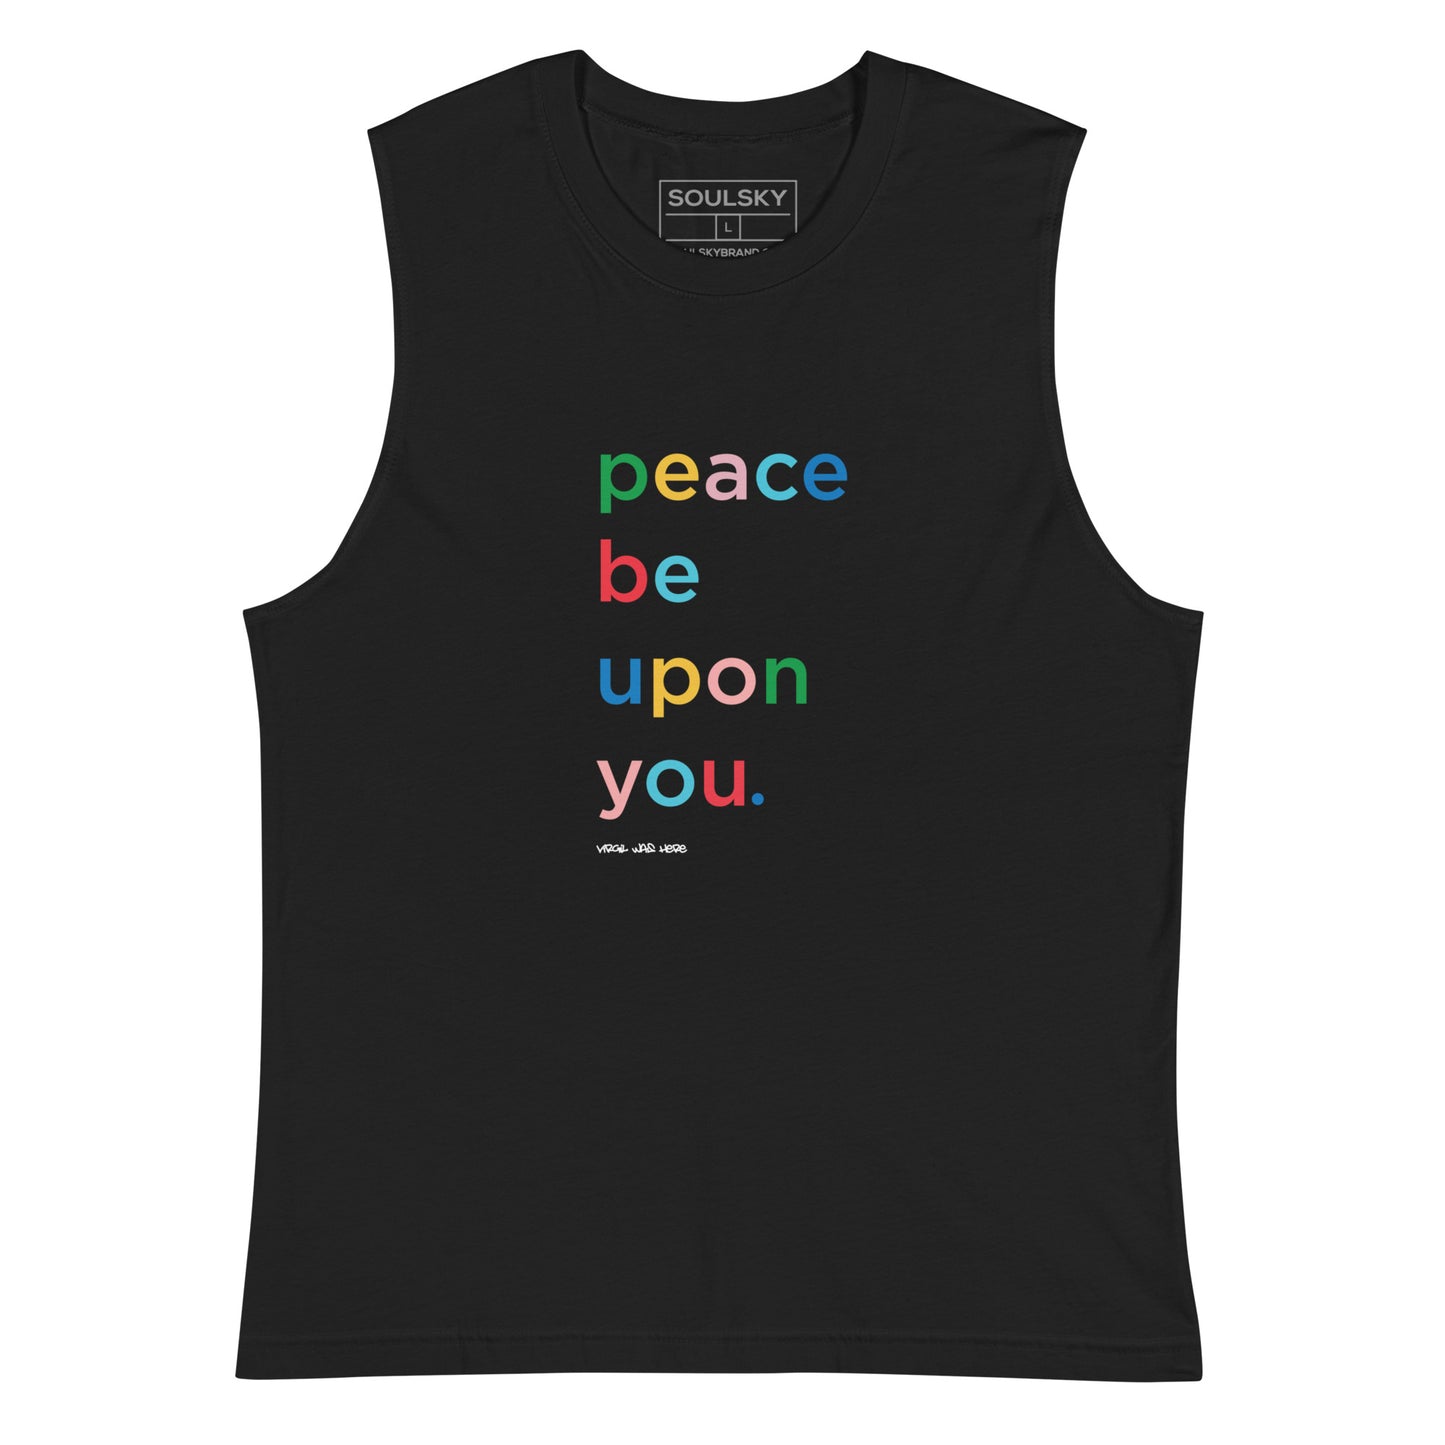 PEACE BE UPON YOU Muscle Shirt